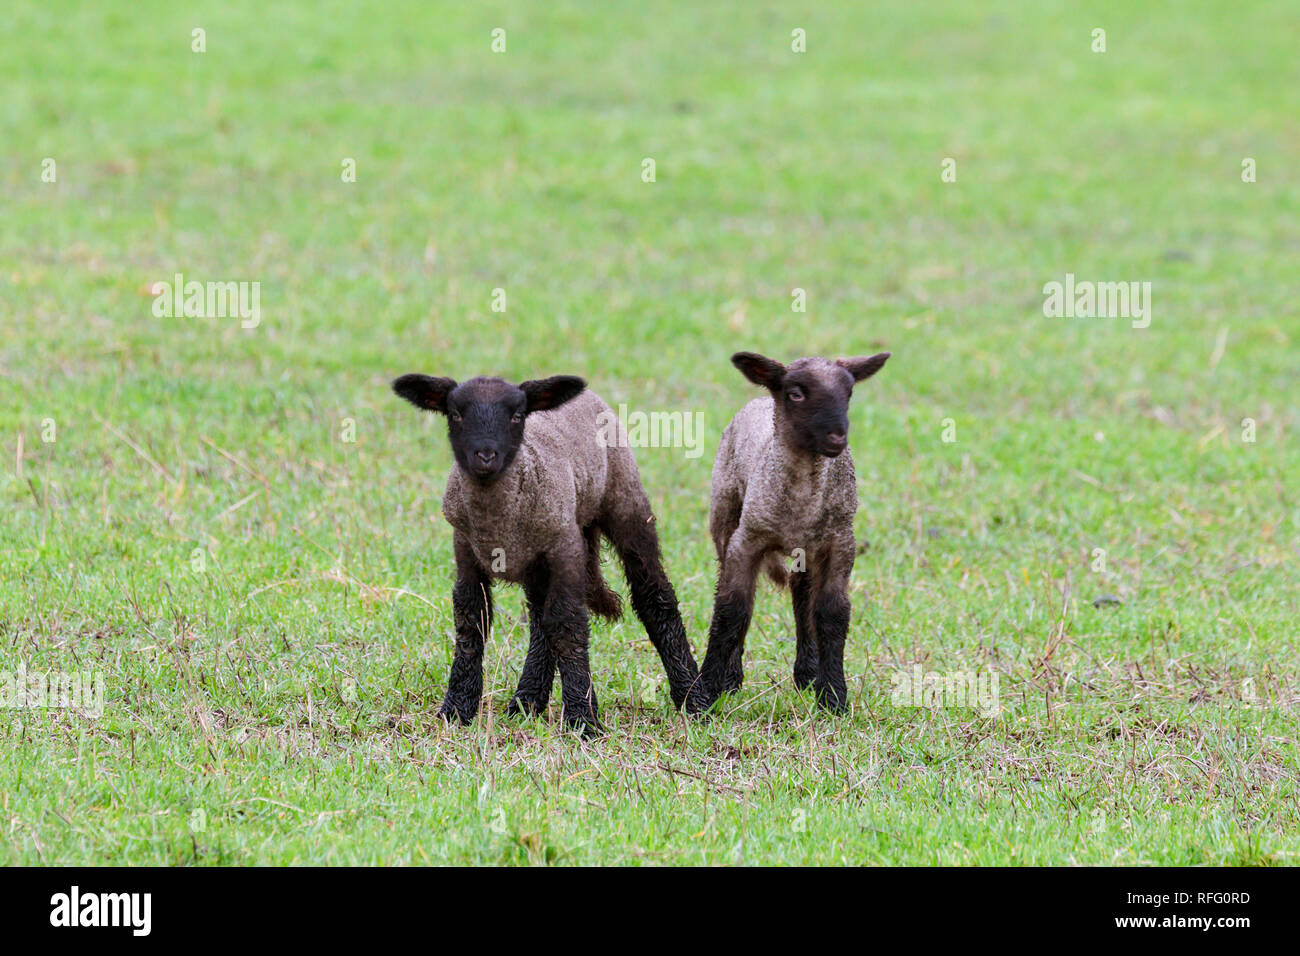 Two new spring lambs in a field in the Willamette Valley in rural Oregon, USA. Stock Photo